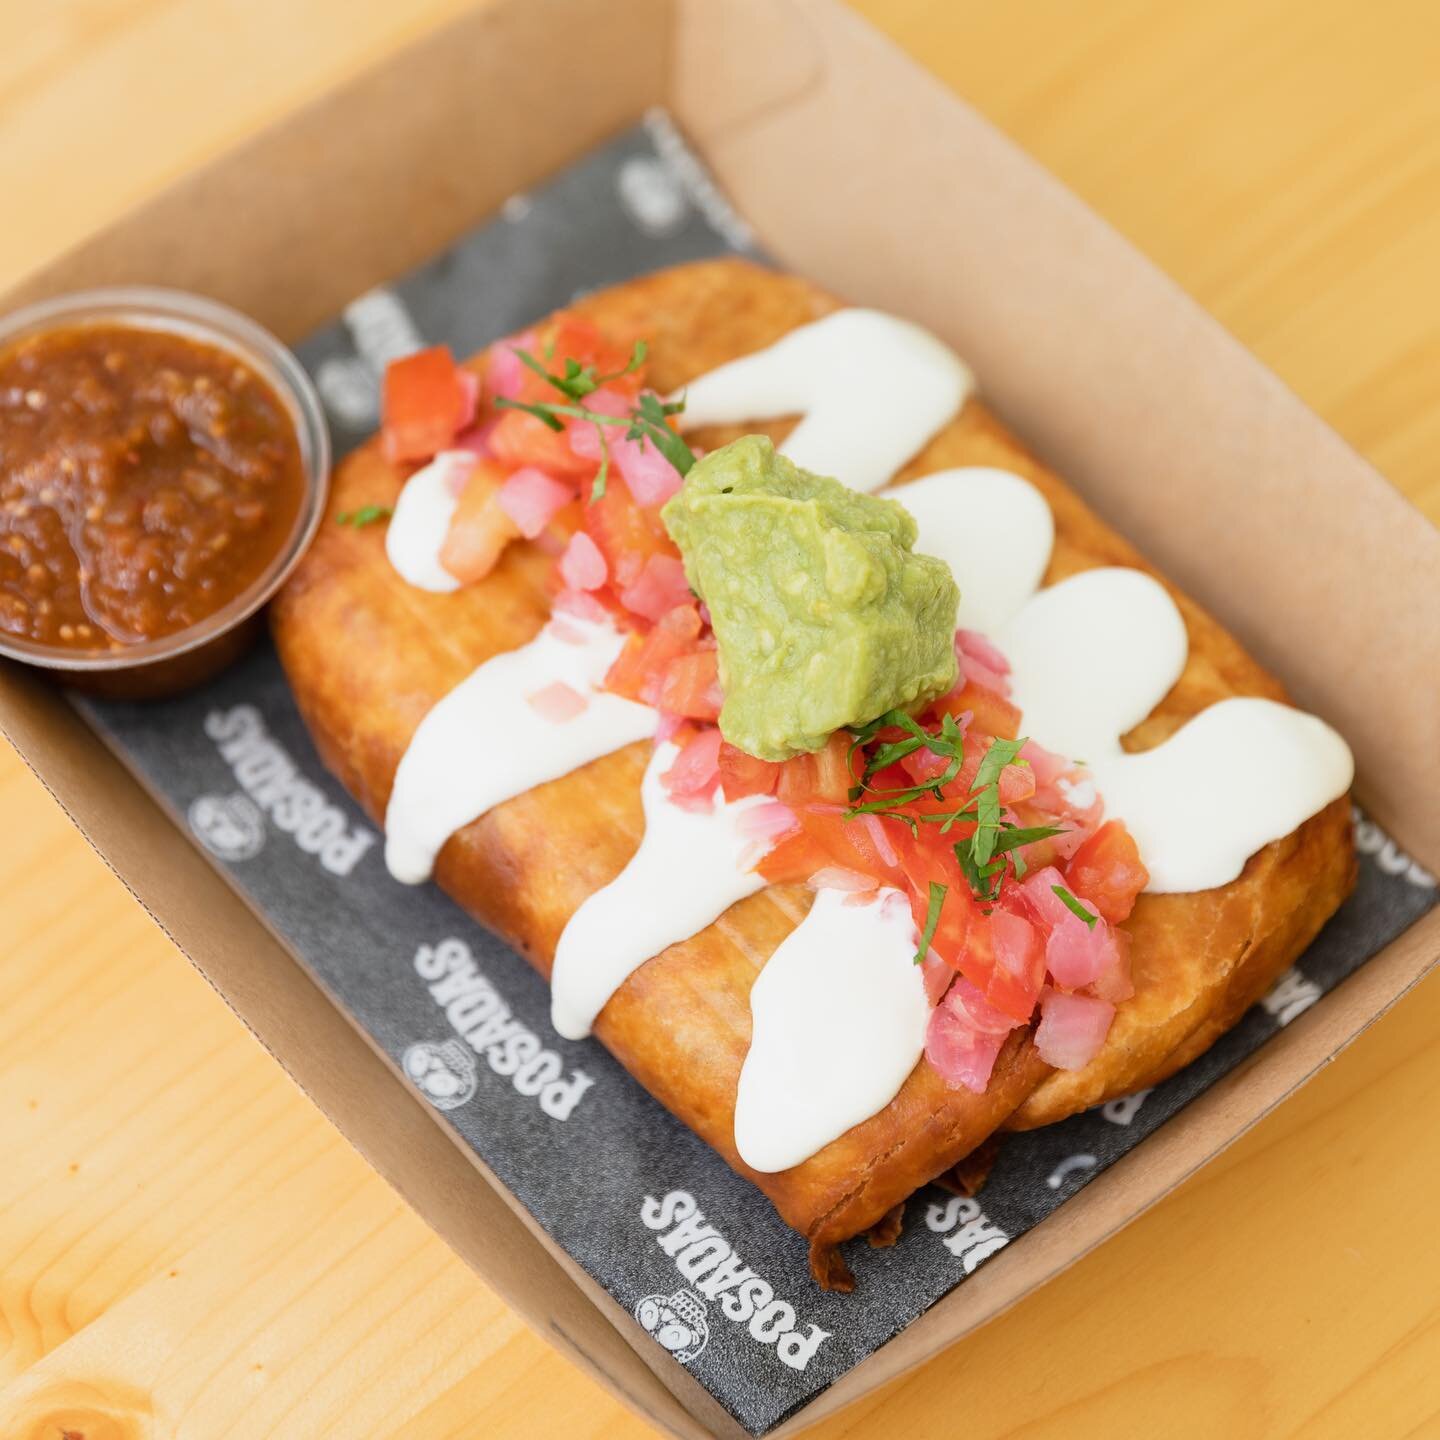 Have you ever tried a Chimichanga? 🌯 
With your choice of Beef or Chicken this Deep fried Burrito is not for the faint hearted! 
Pop on in to @posadas_cantina today 11-8pm and see what we&rsquo;re talking about 😉 Dine in or Takeaway available 👍🏼
